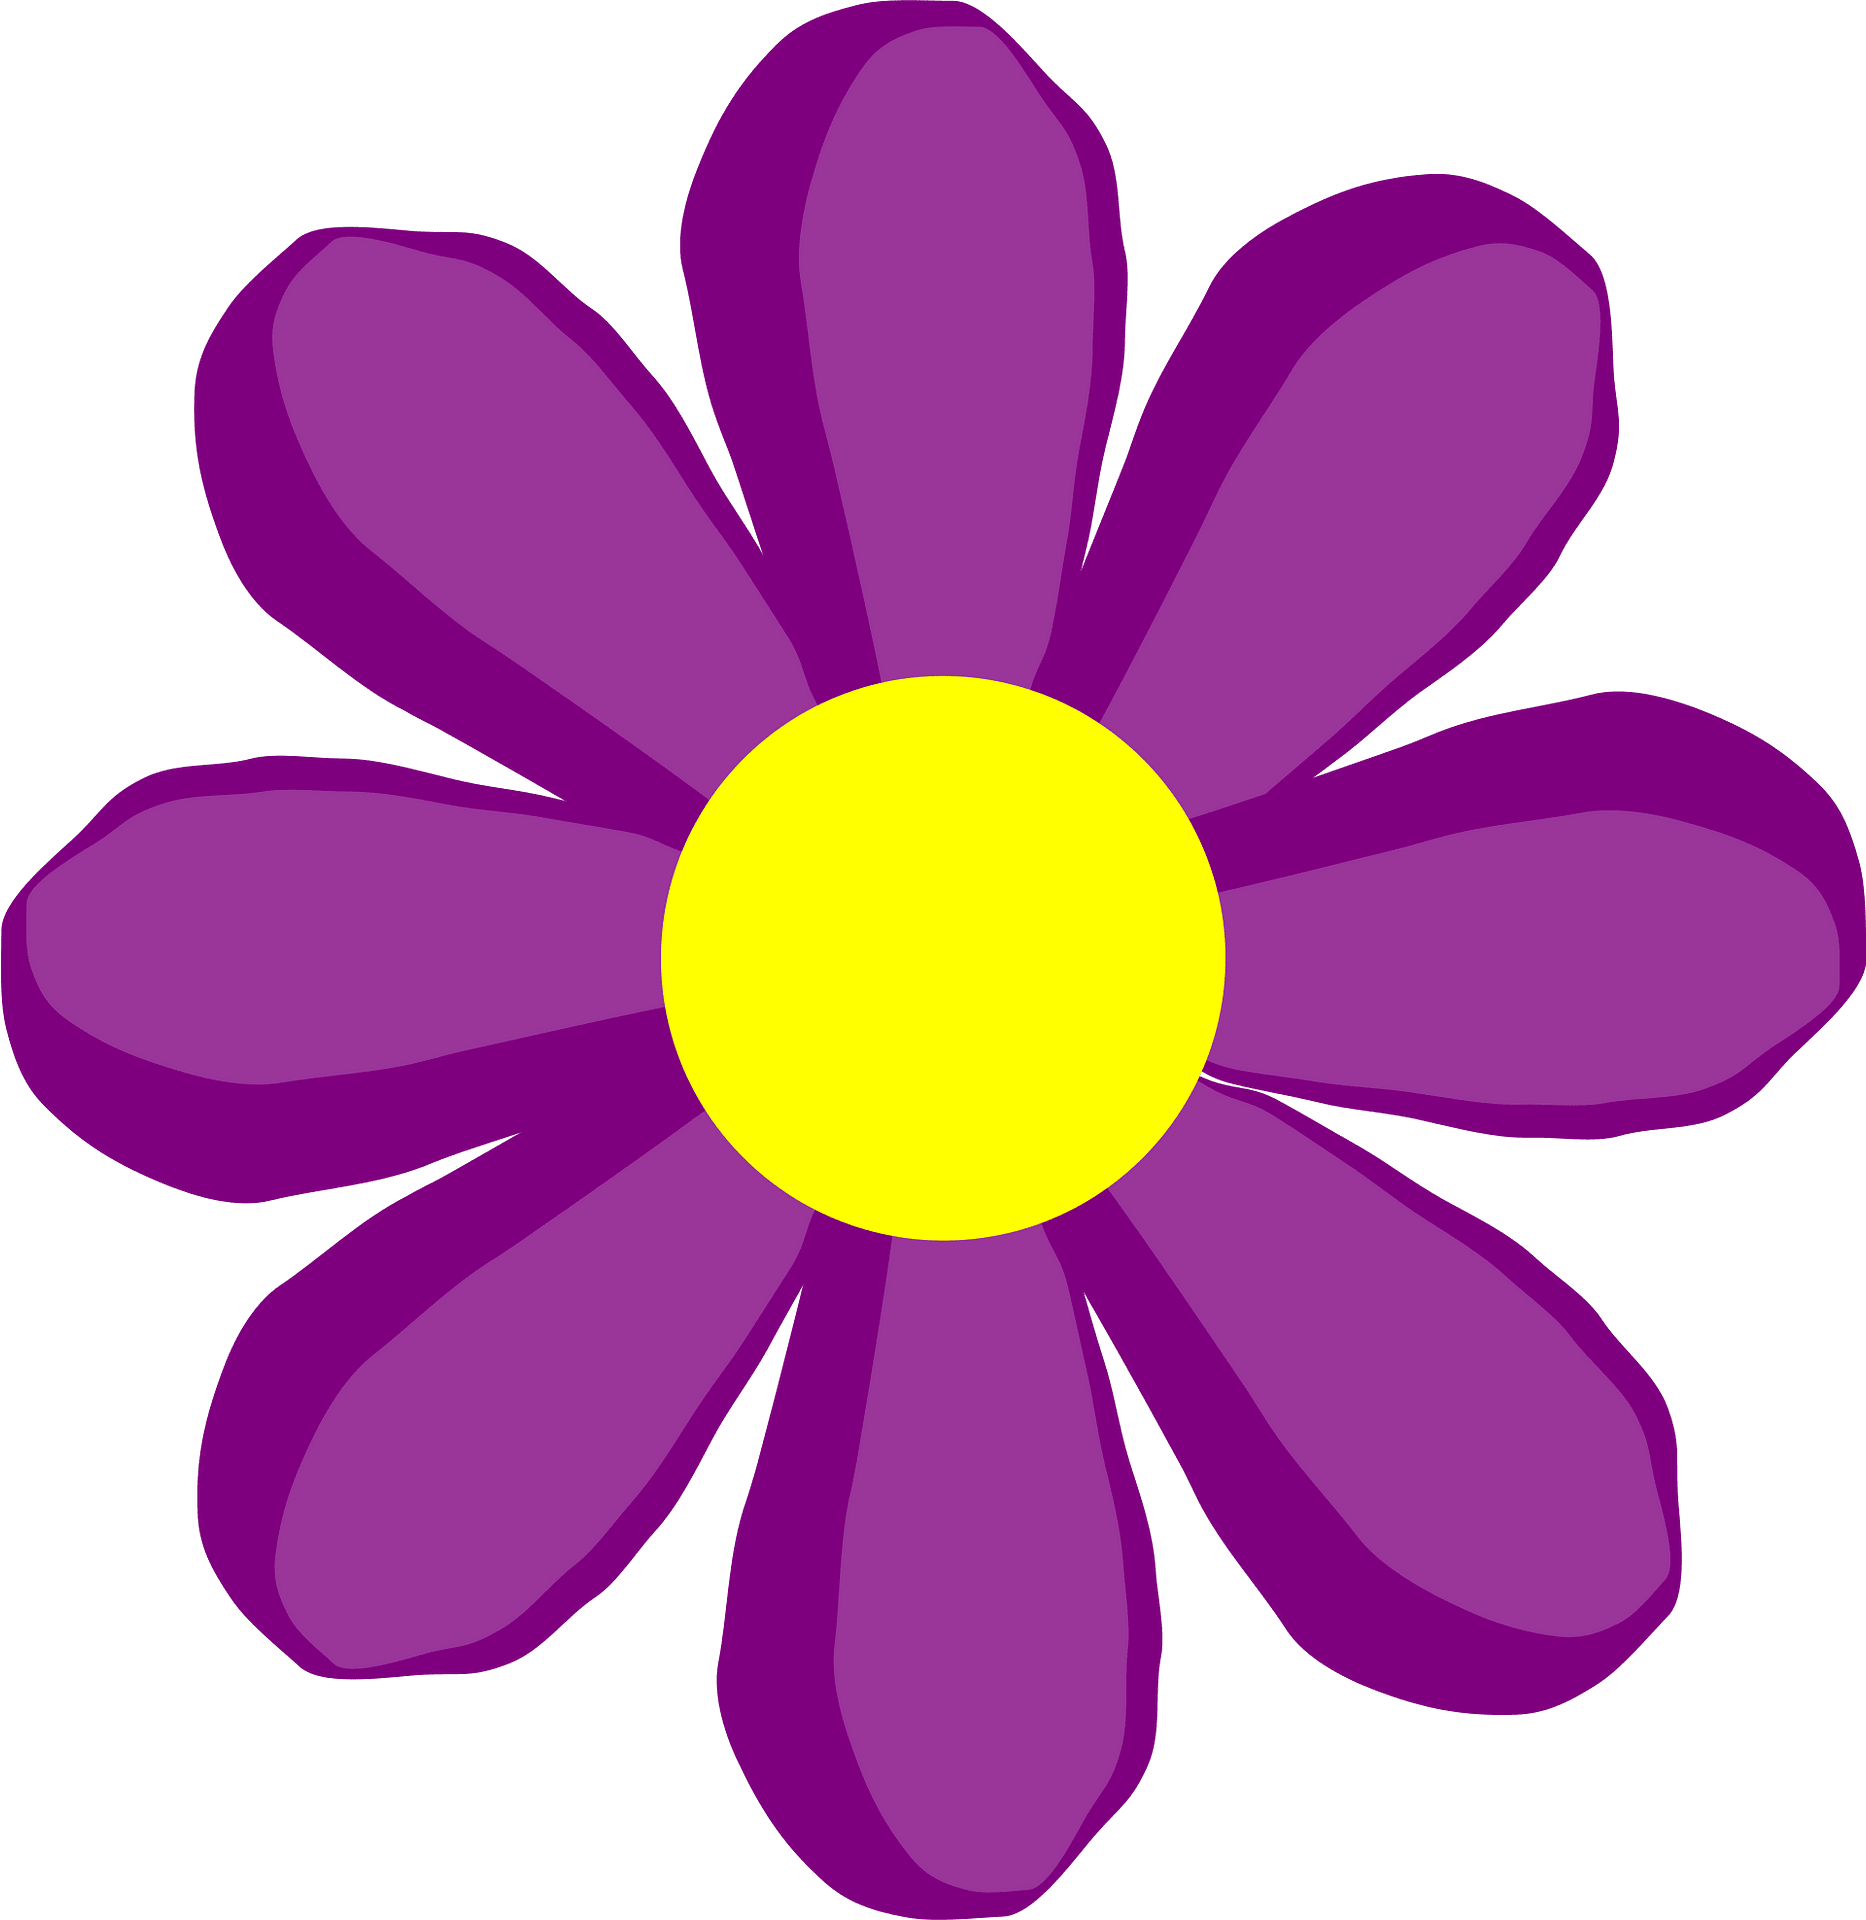 Floral clip art images free download - Clip Art Library